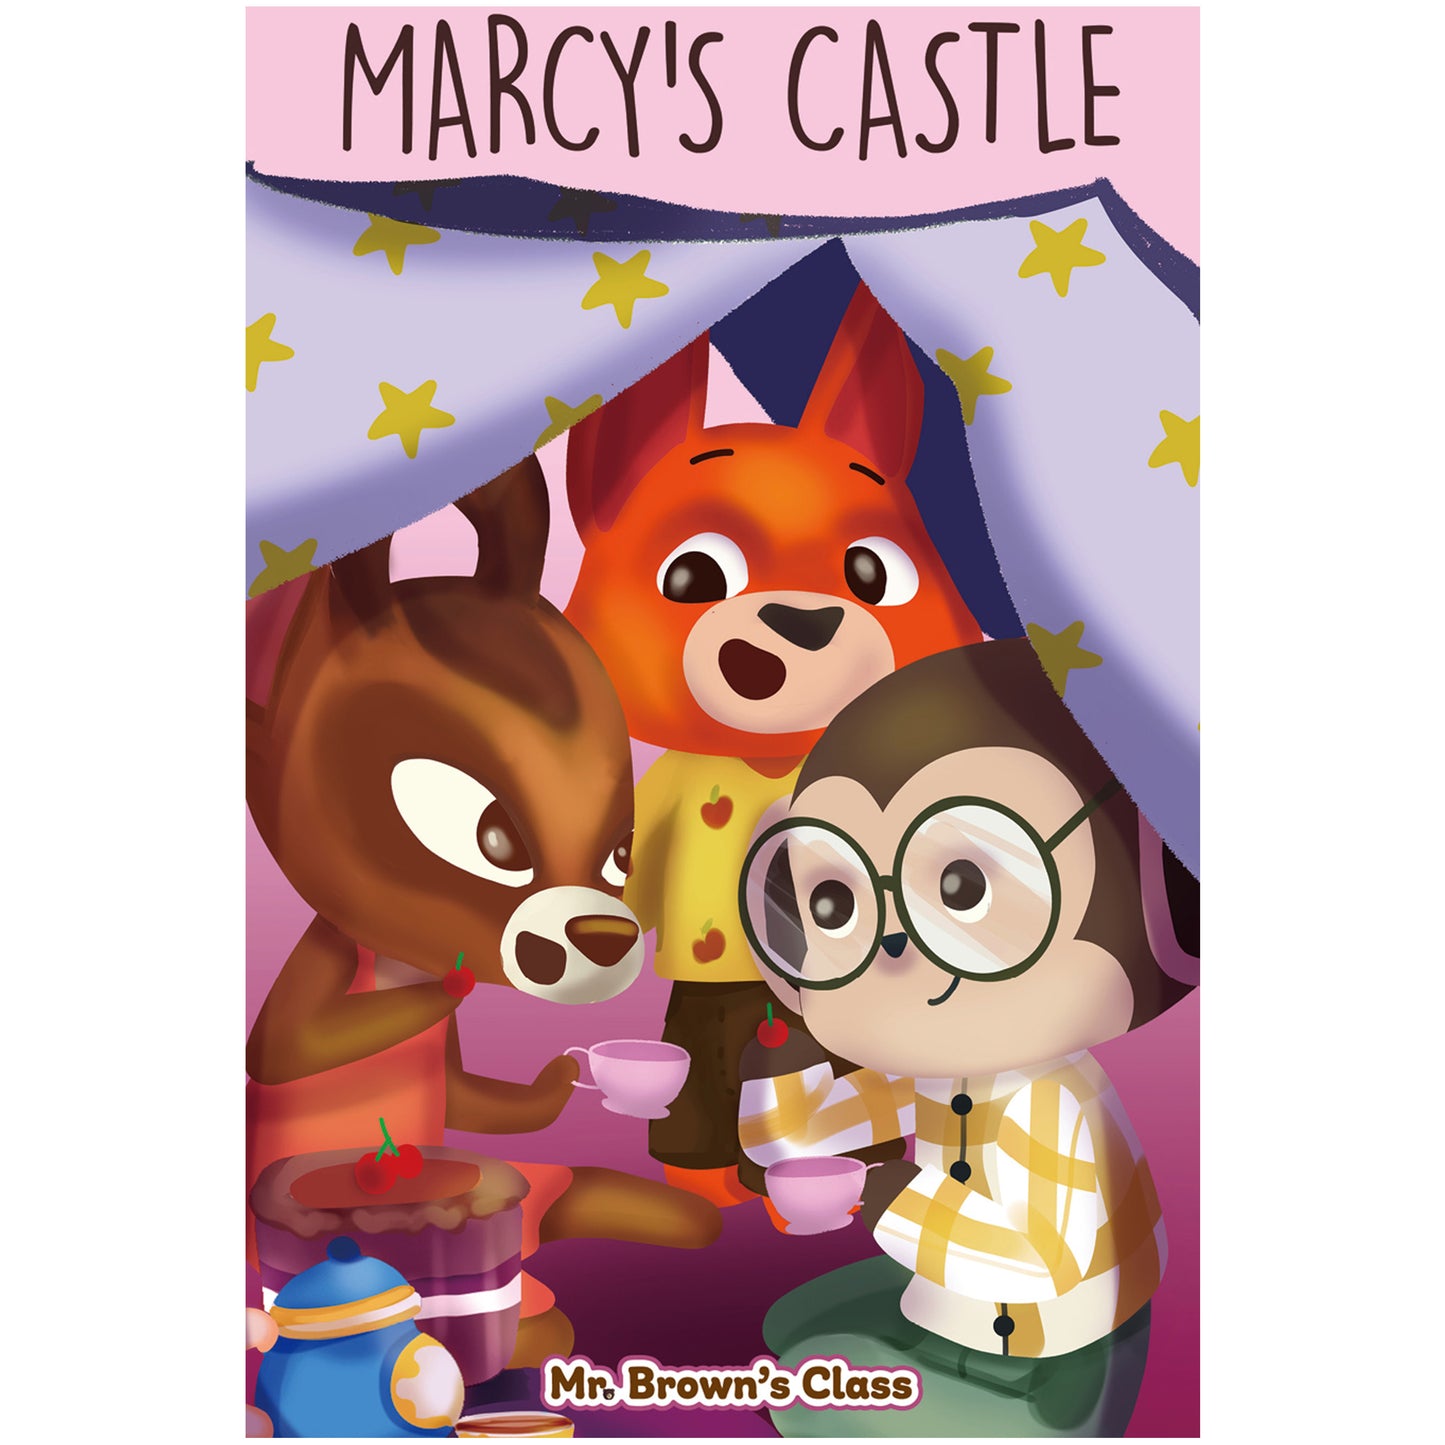 Marcy's Castle